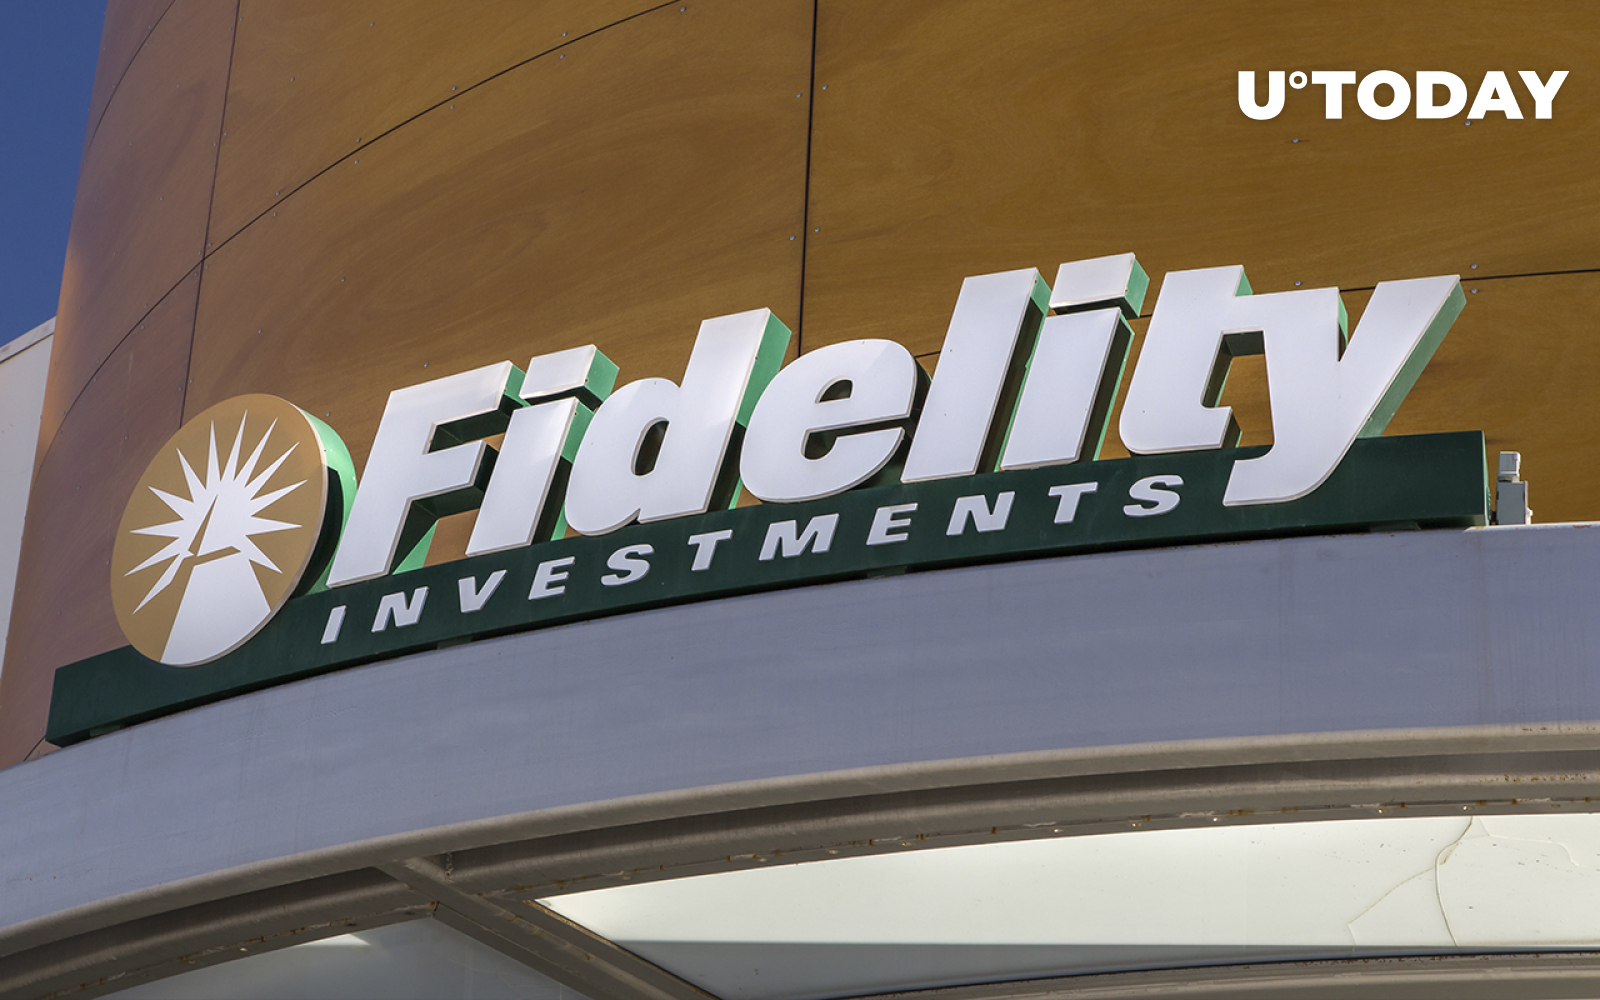 Financial Giant Fidelity Considering Enabling Crypto Transfers